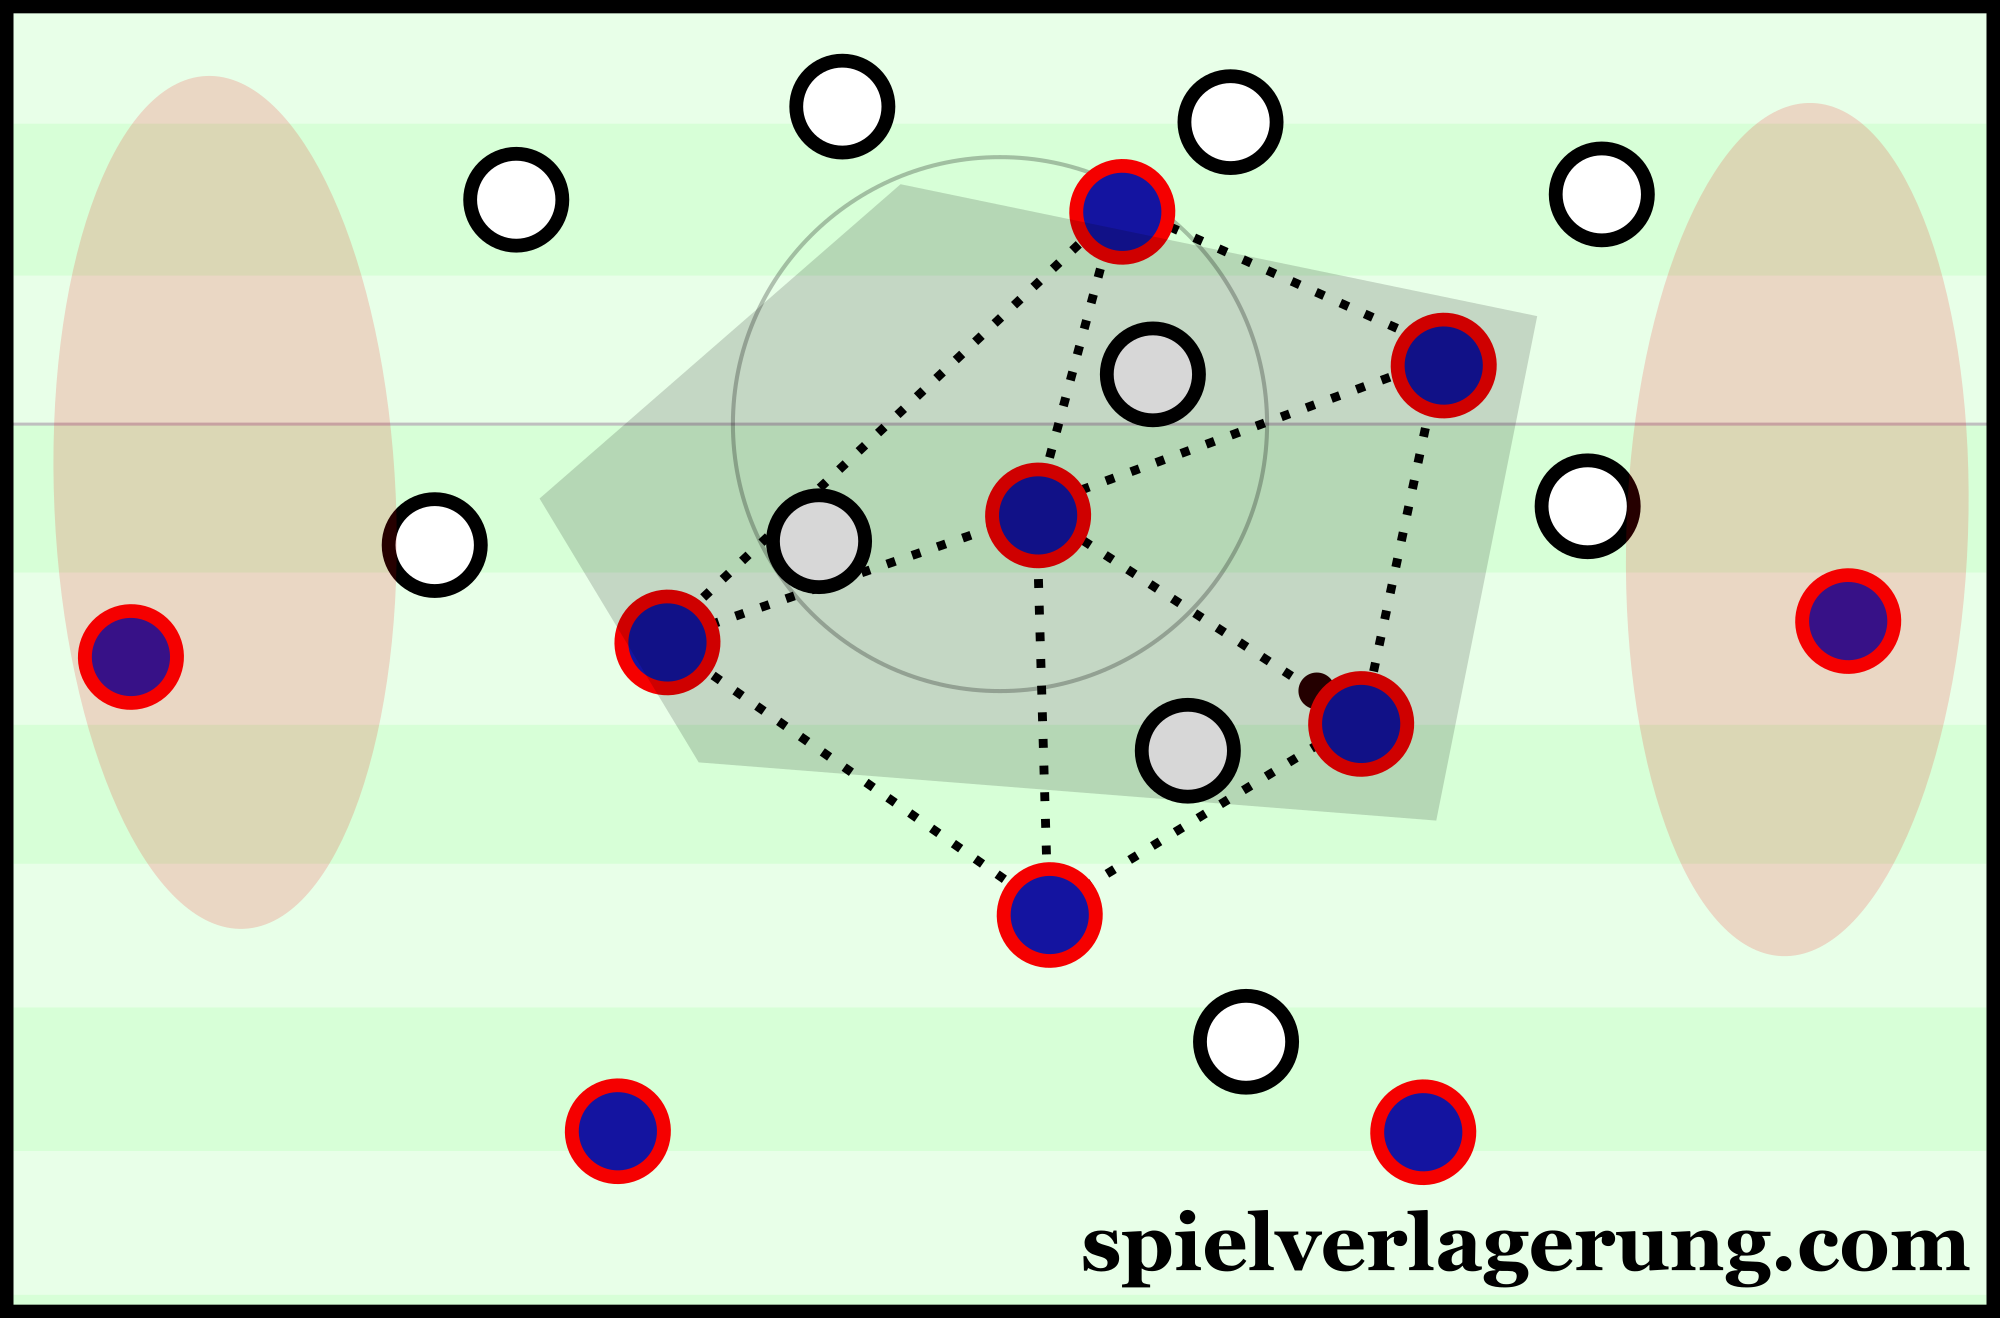 PSG's central-focus leads to high levels of connections through the middle.